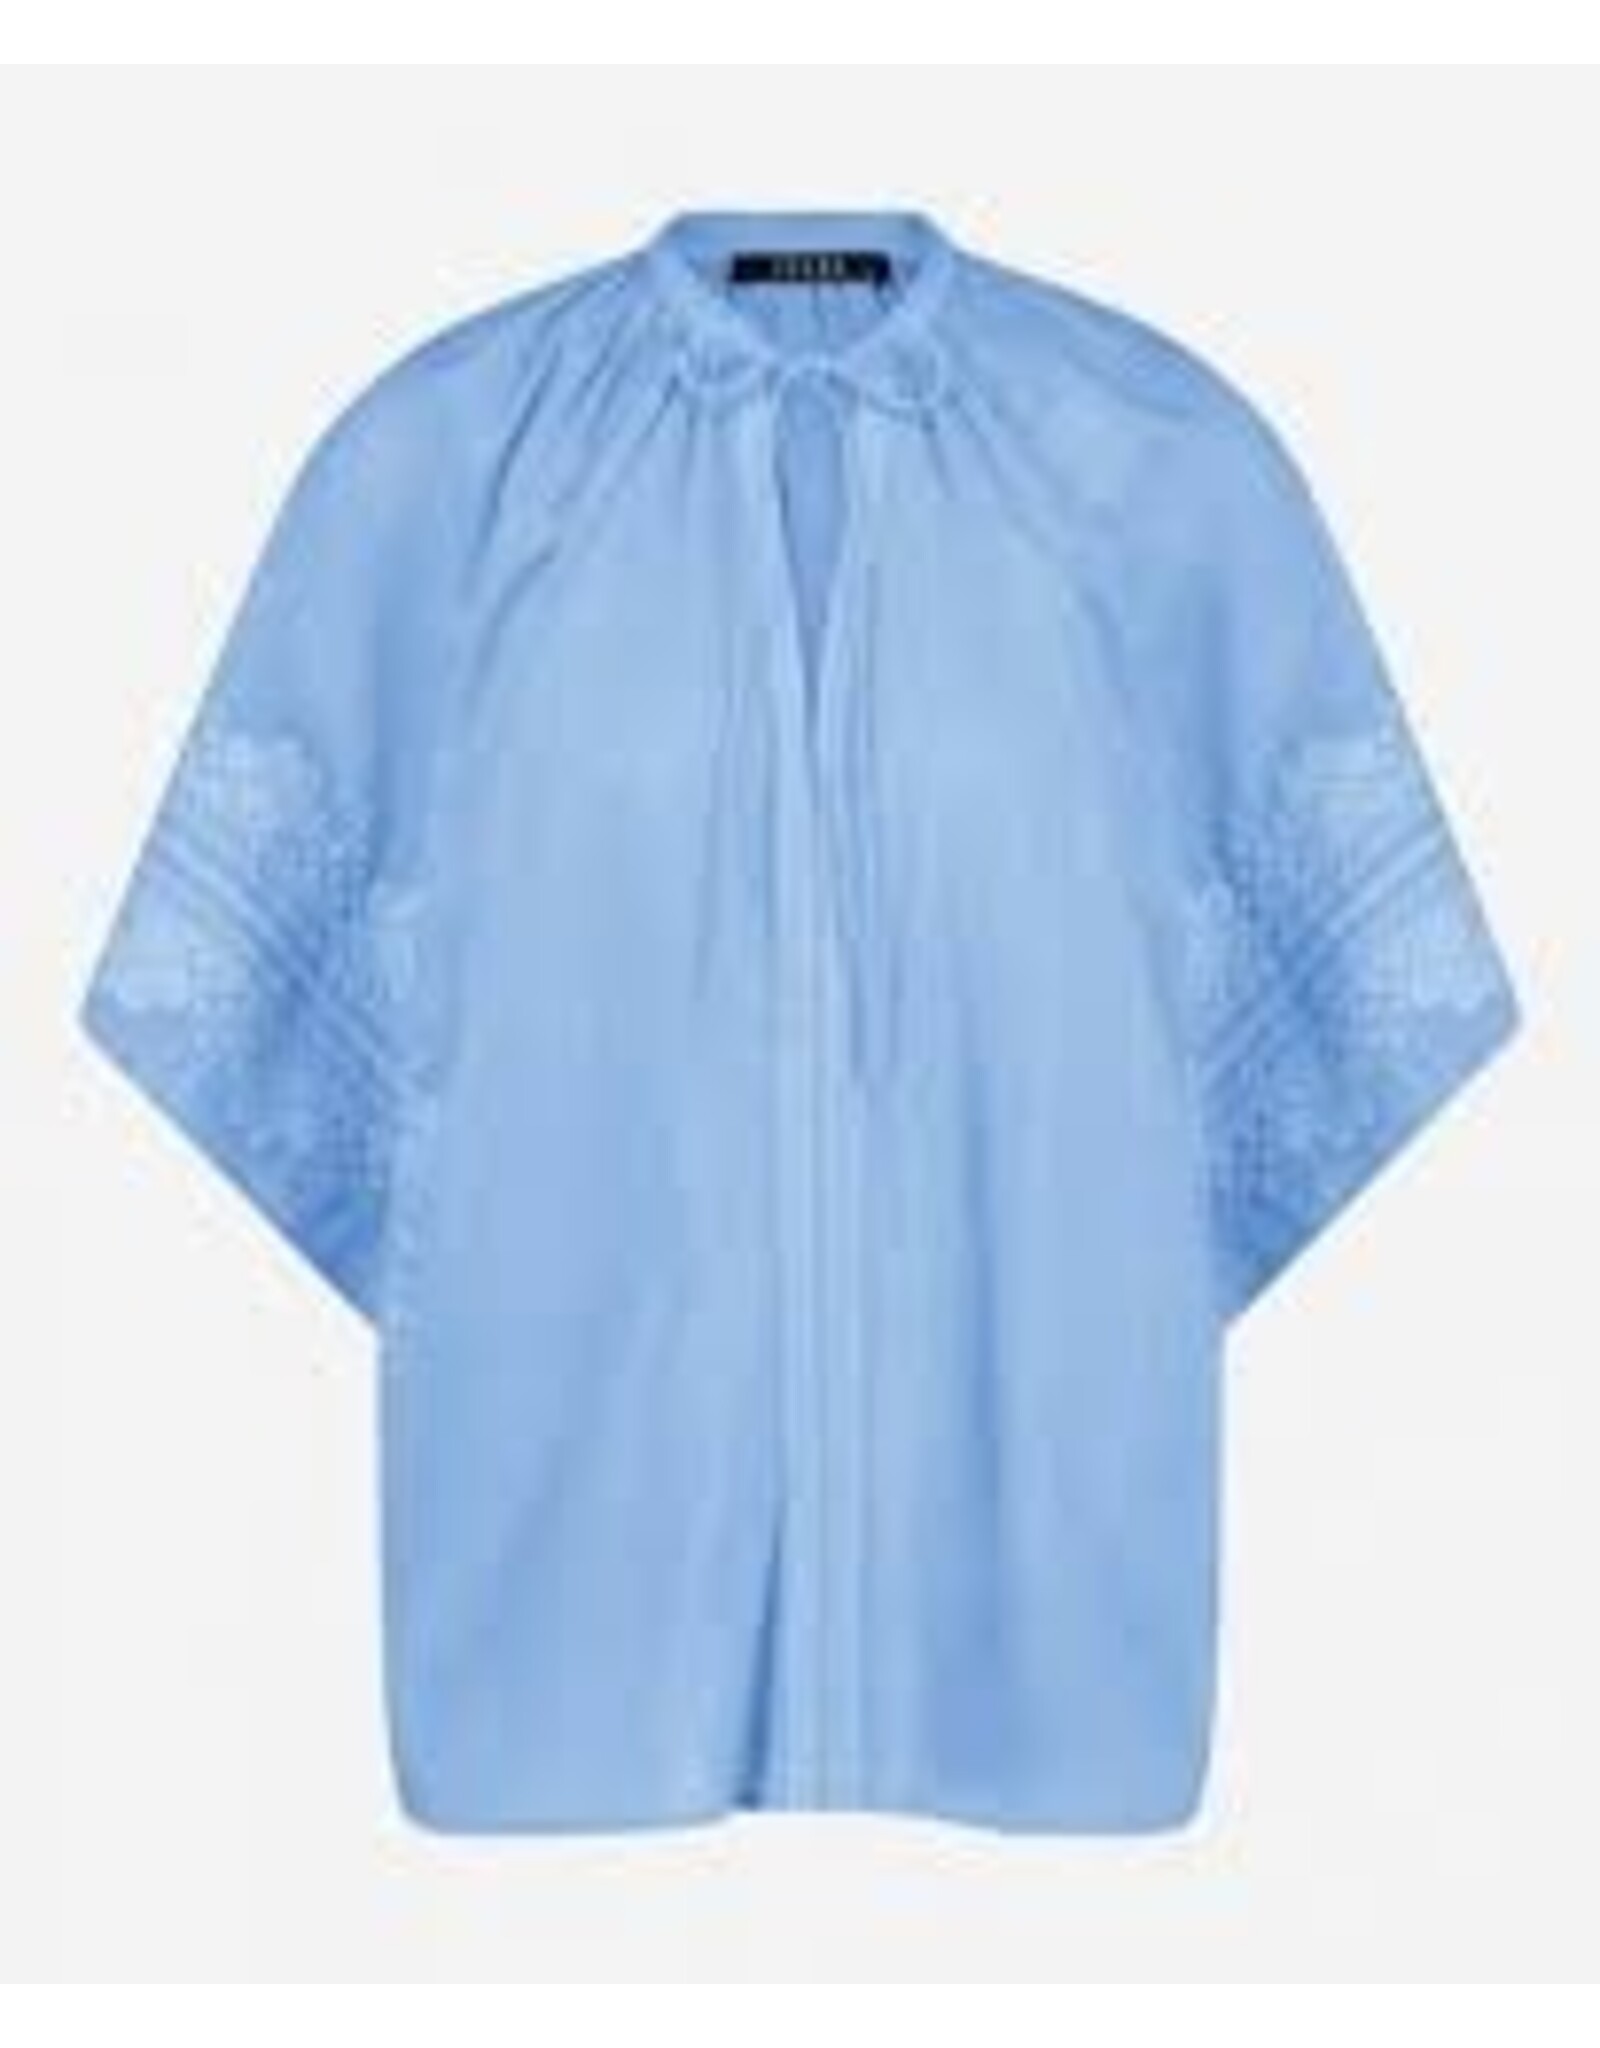 Ibana Blouse Topia - Airy Blue